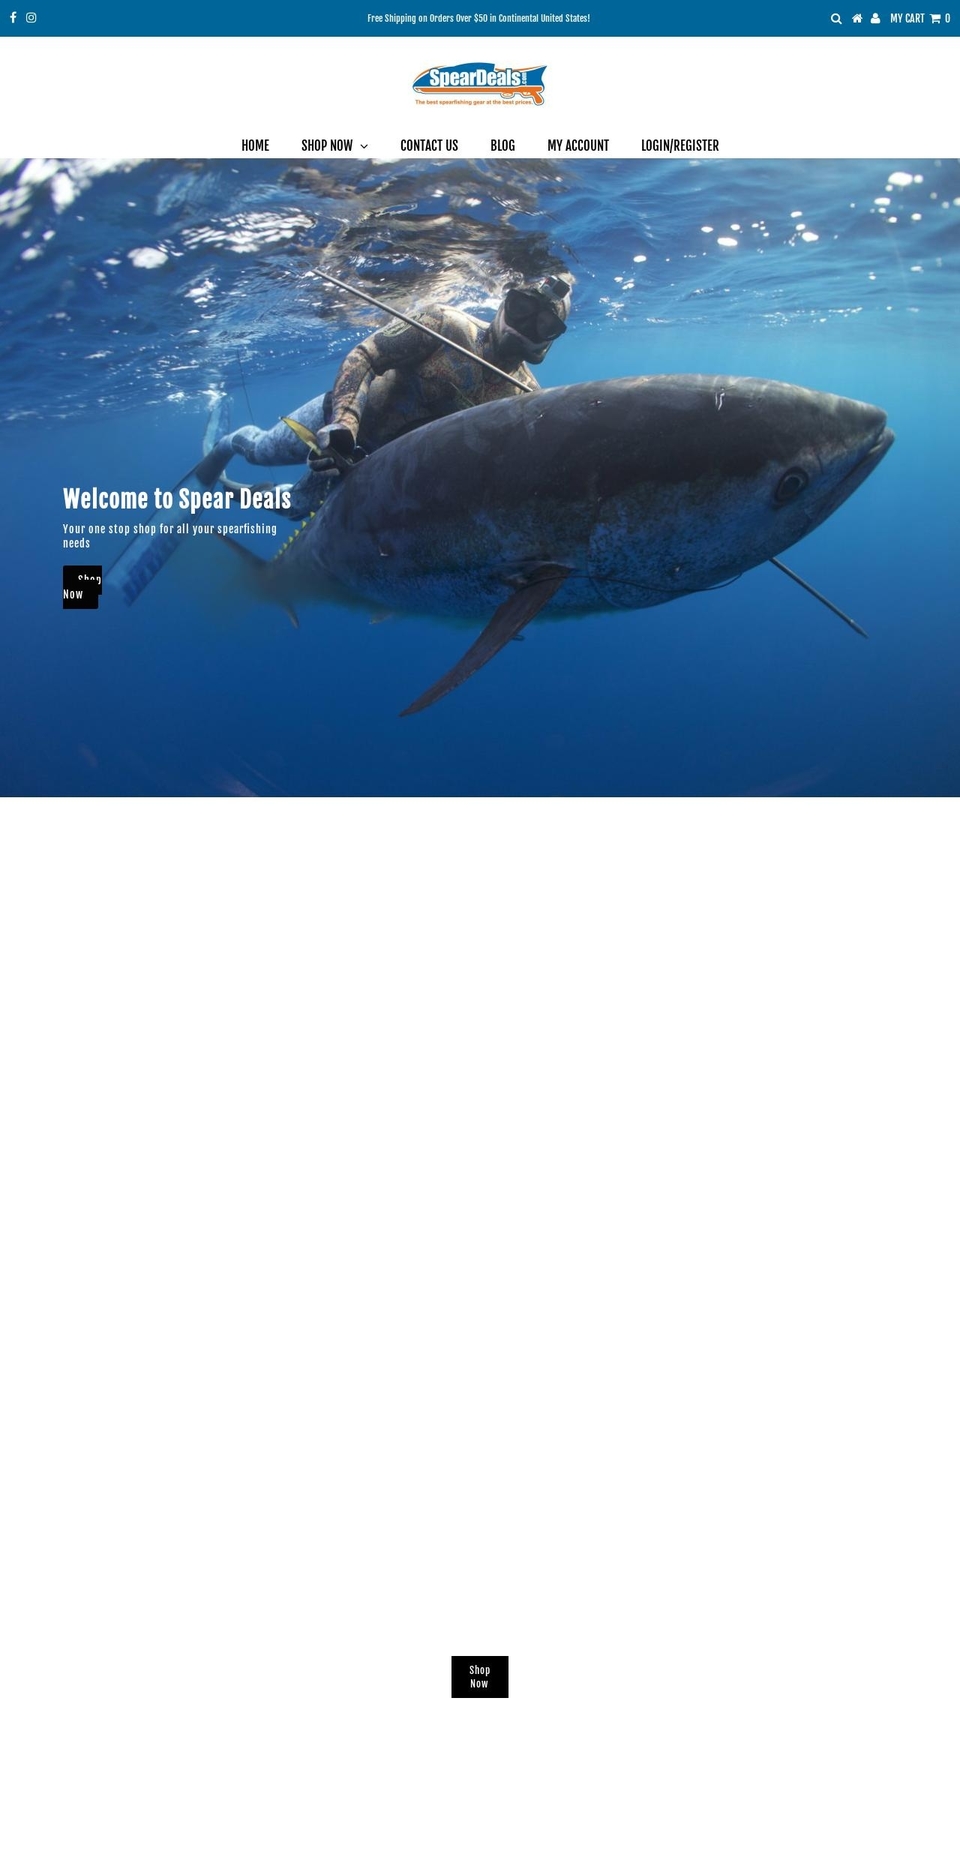 Current Shopify theme site example spearfishing.ninja